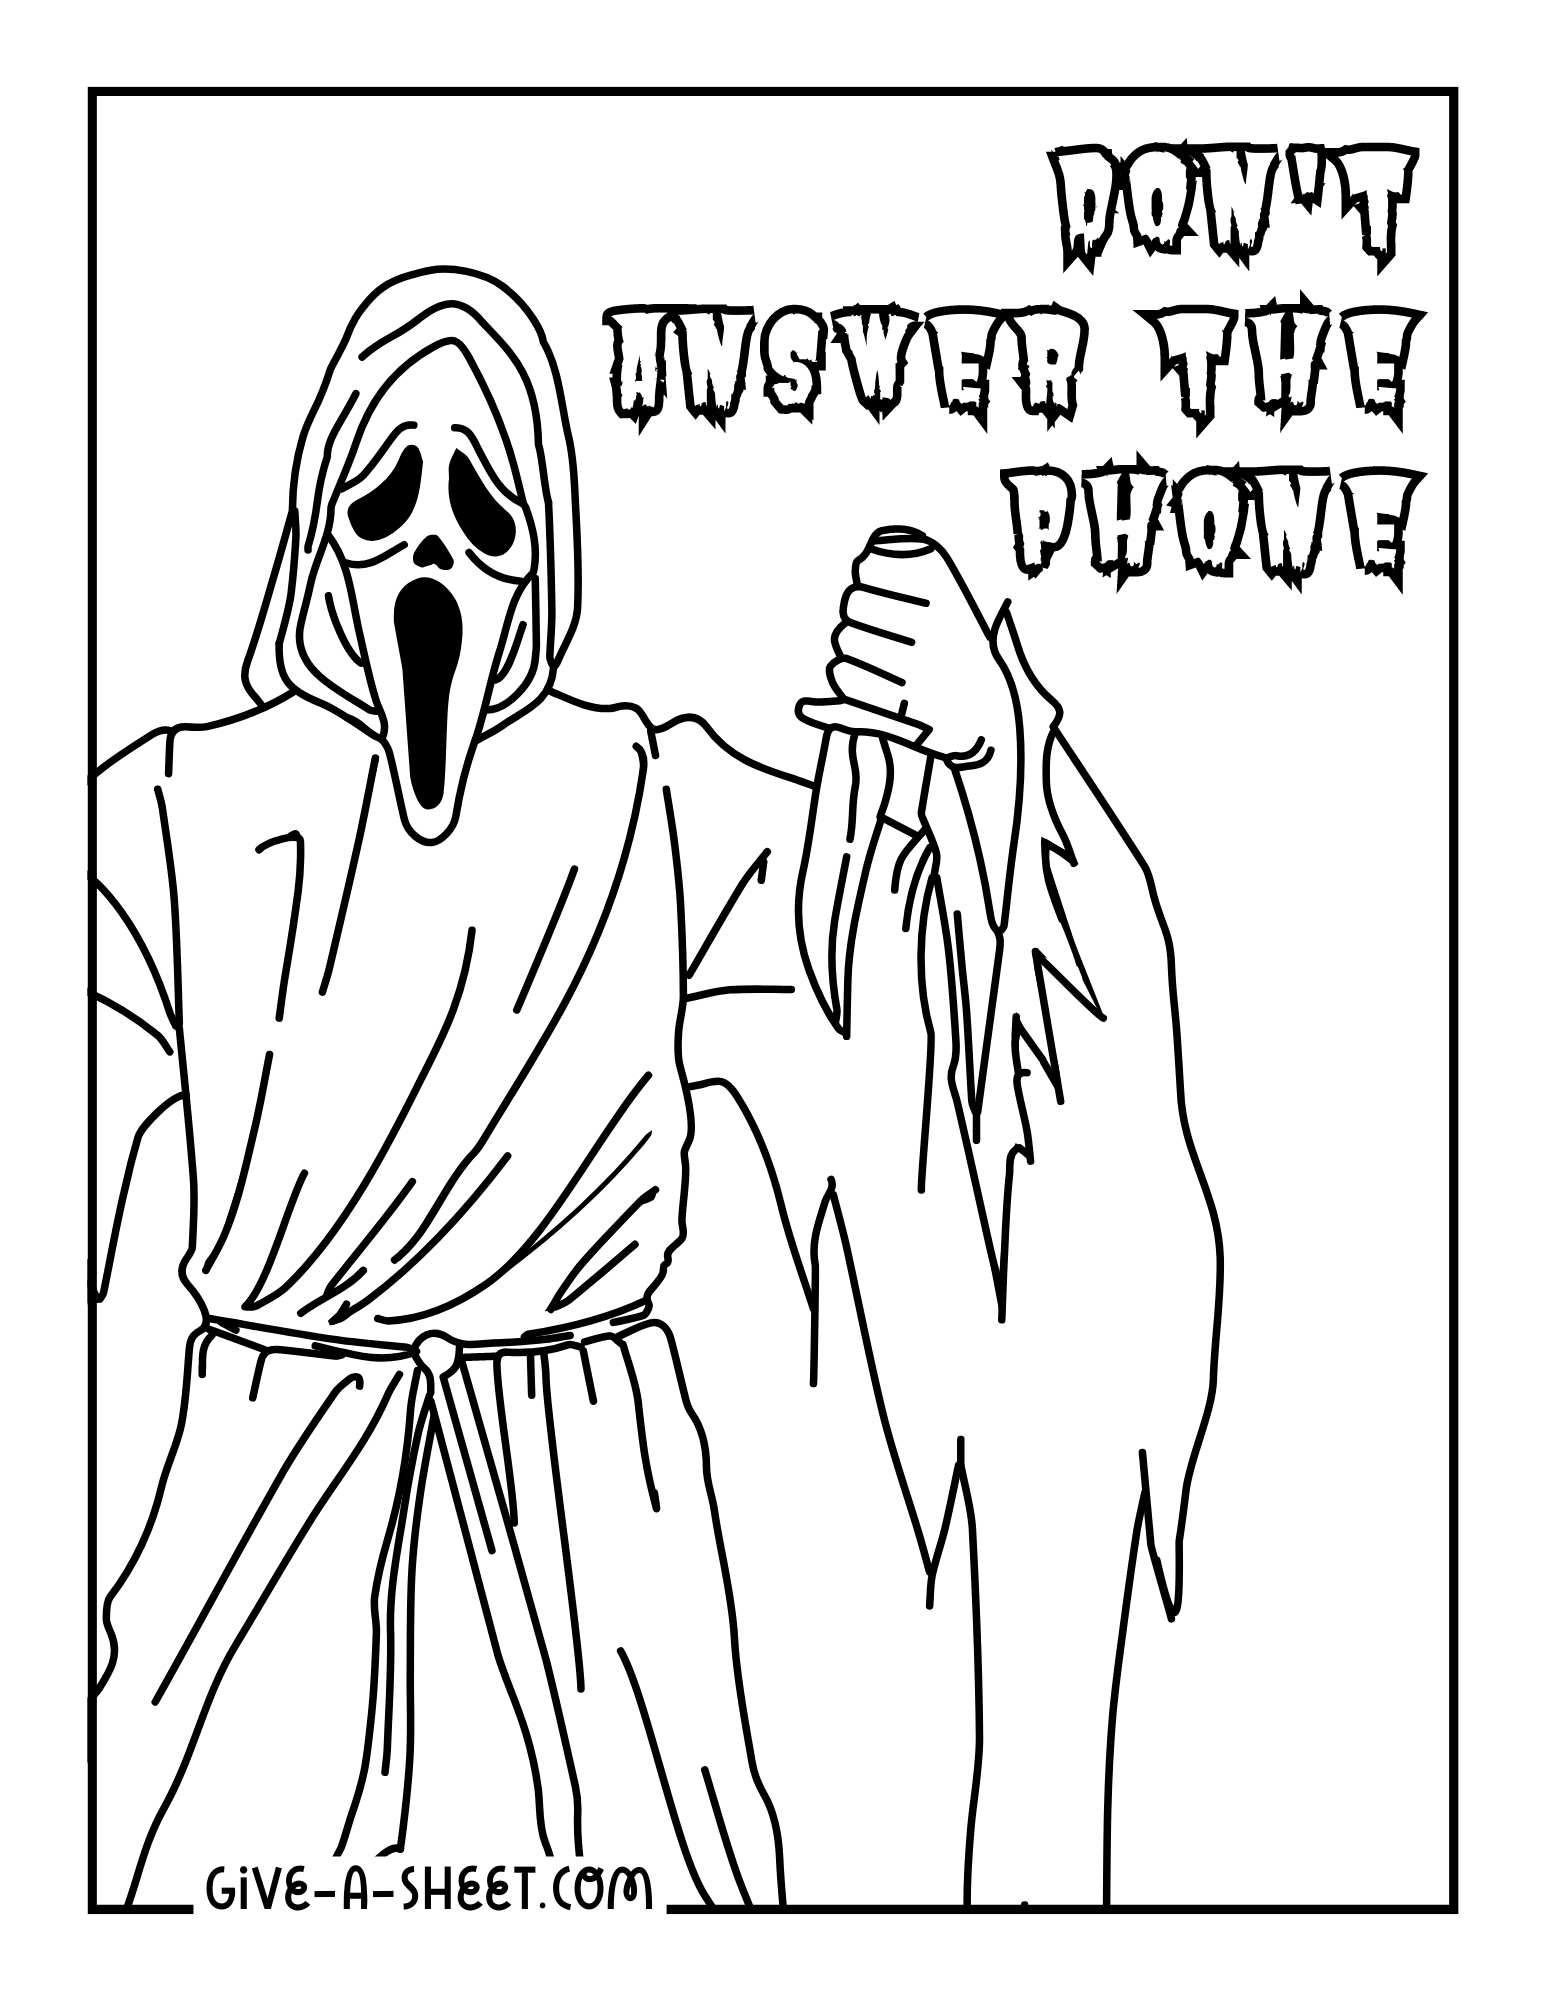 Ghostface spooky decoration halloween coloring page.